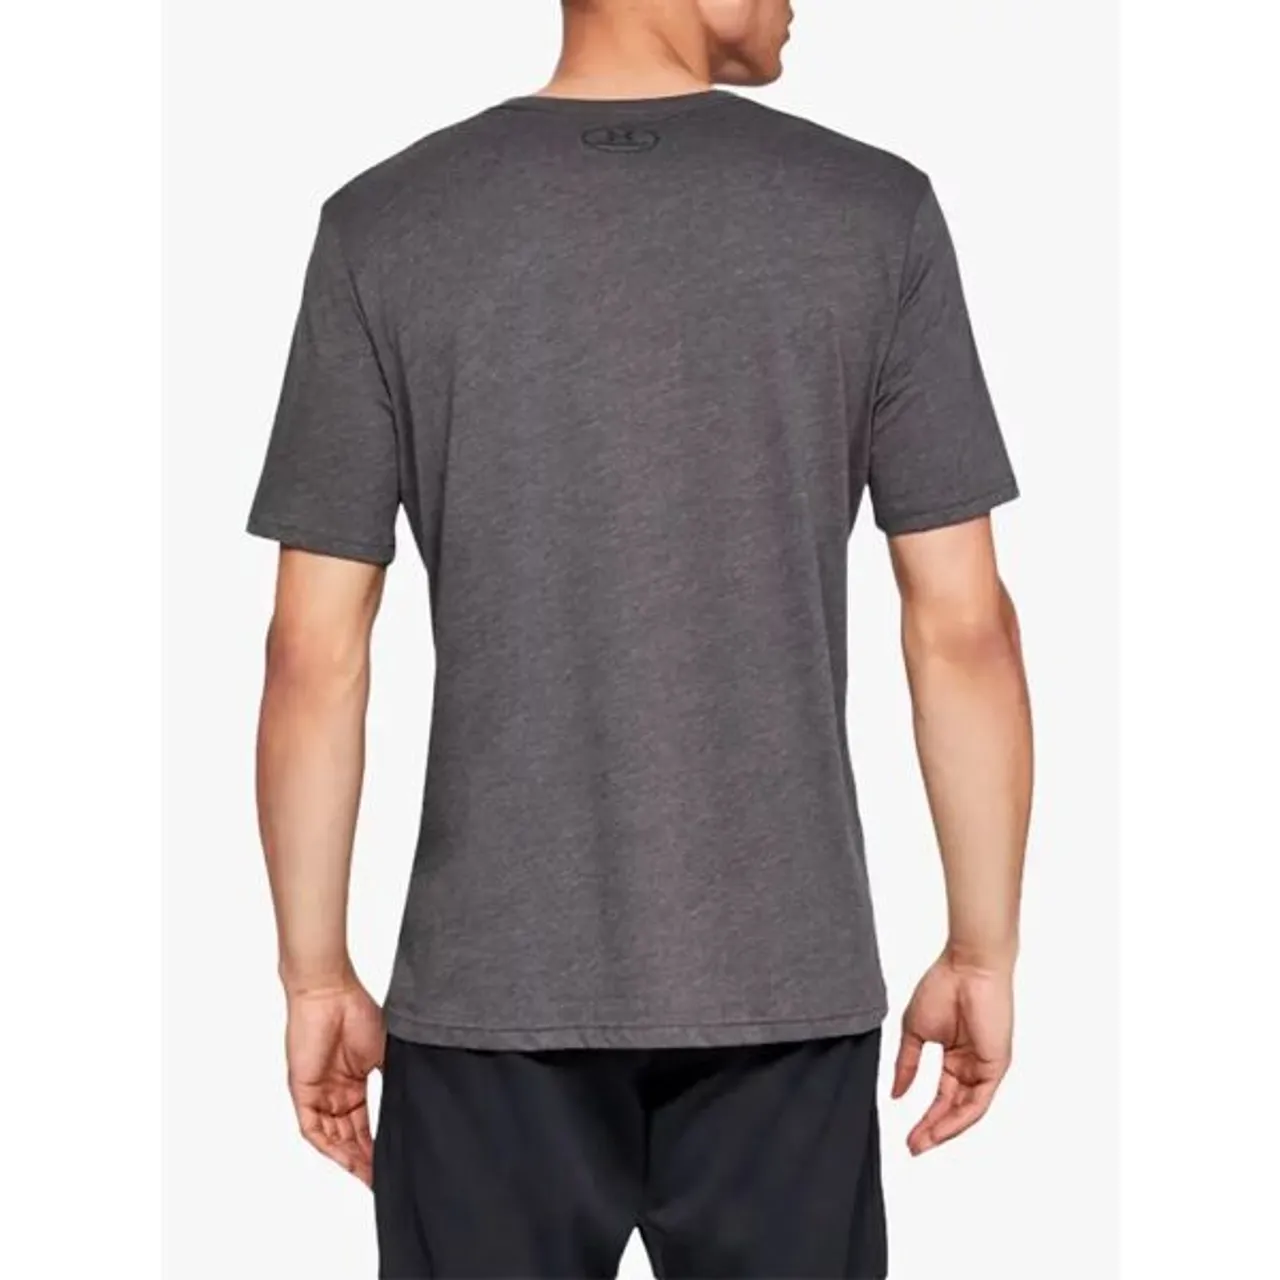 Under Armour Charged Cotton Short Sleeve Training Top, Charcoal Medium Heather/Black - Charcoal Medium Heather/Black - Male